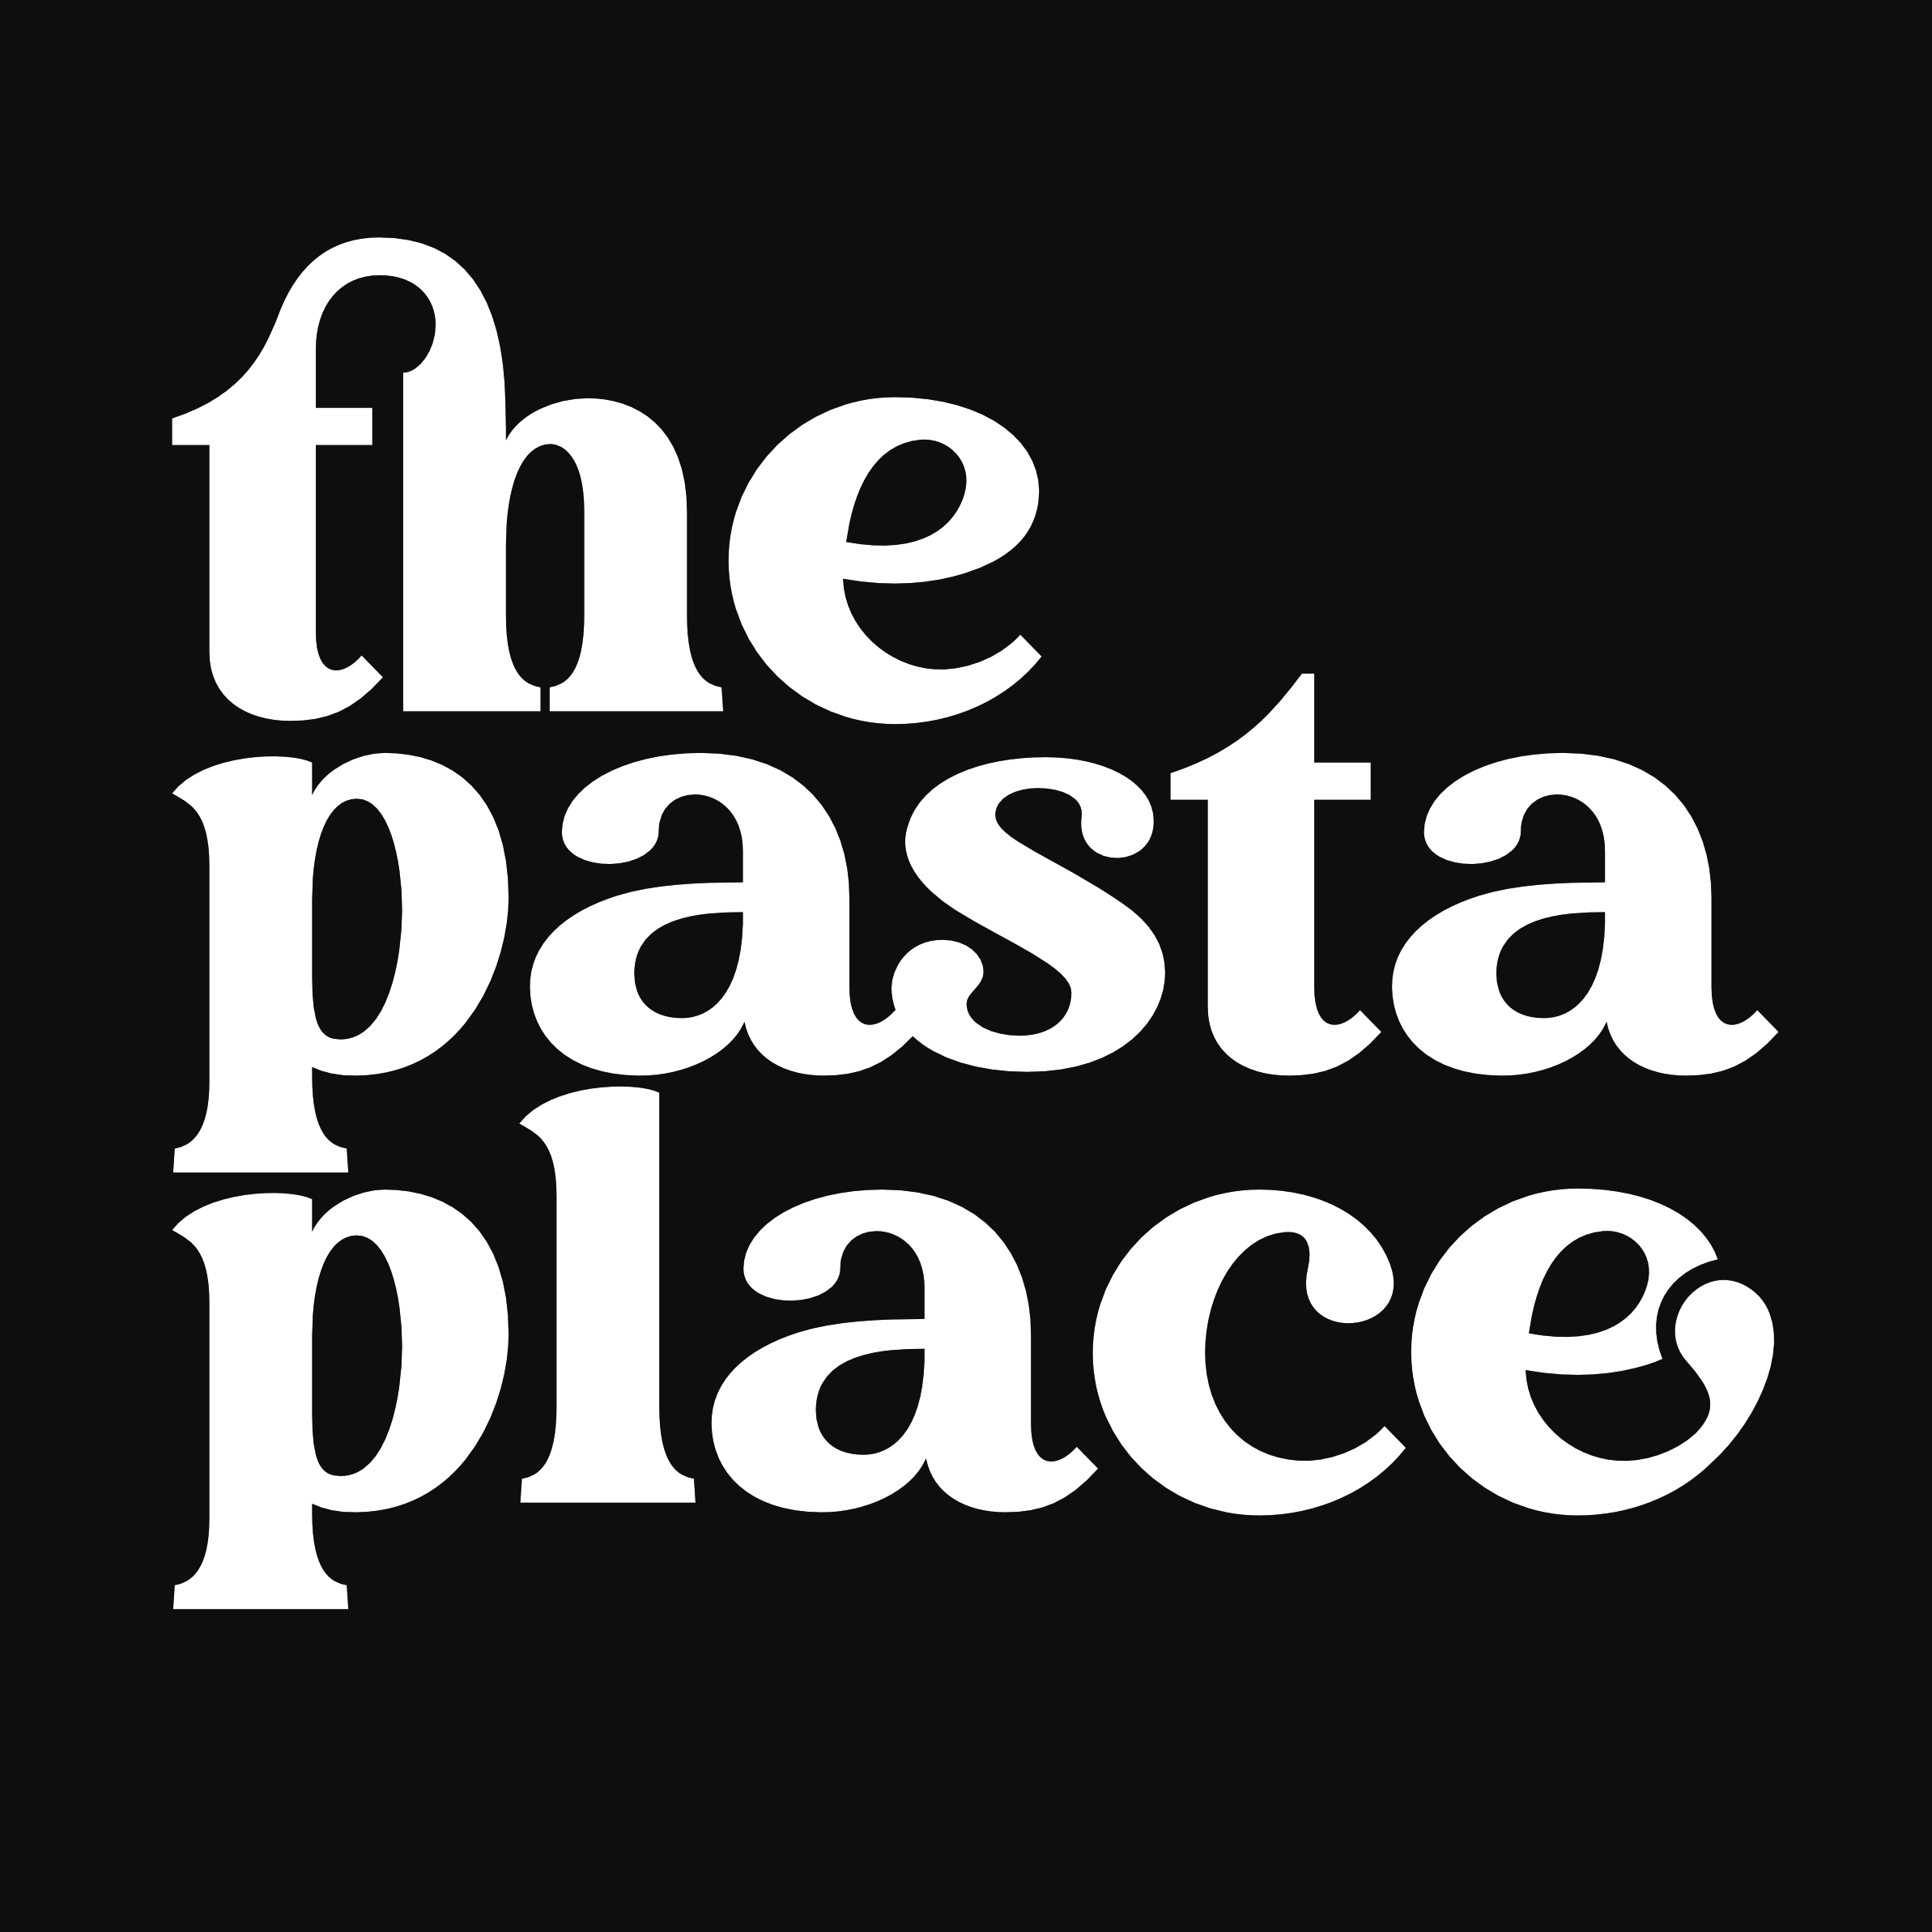 The Pasta Place